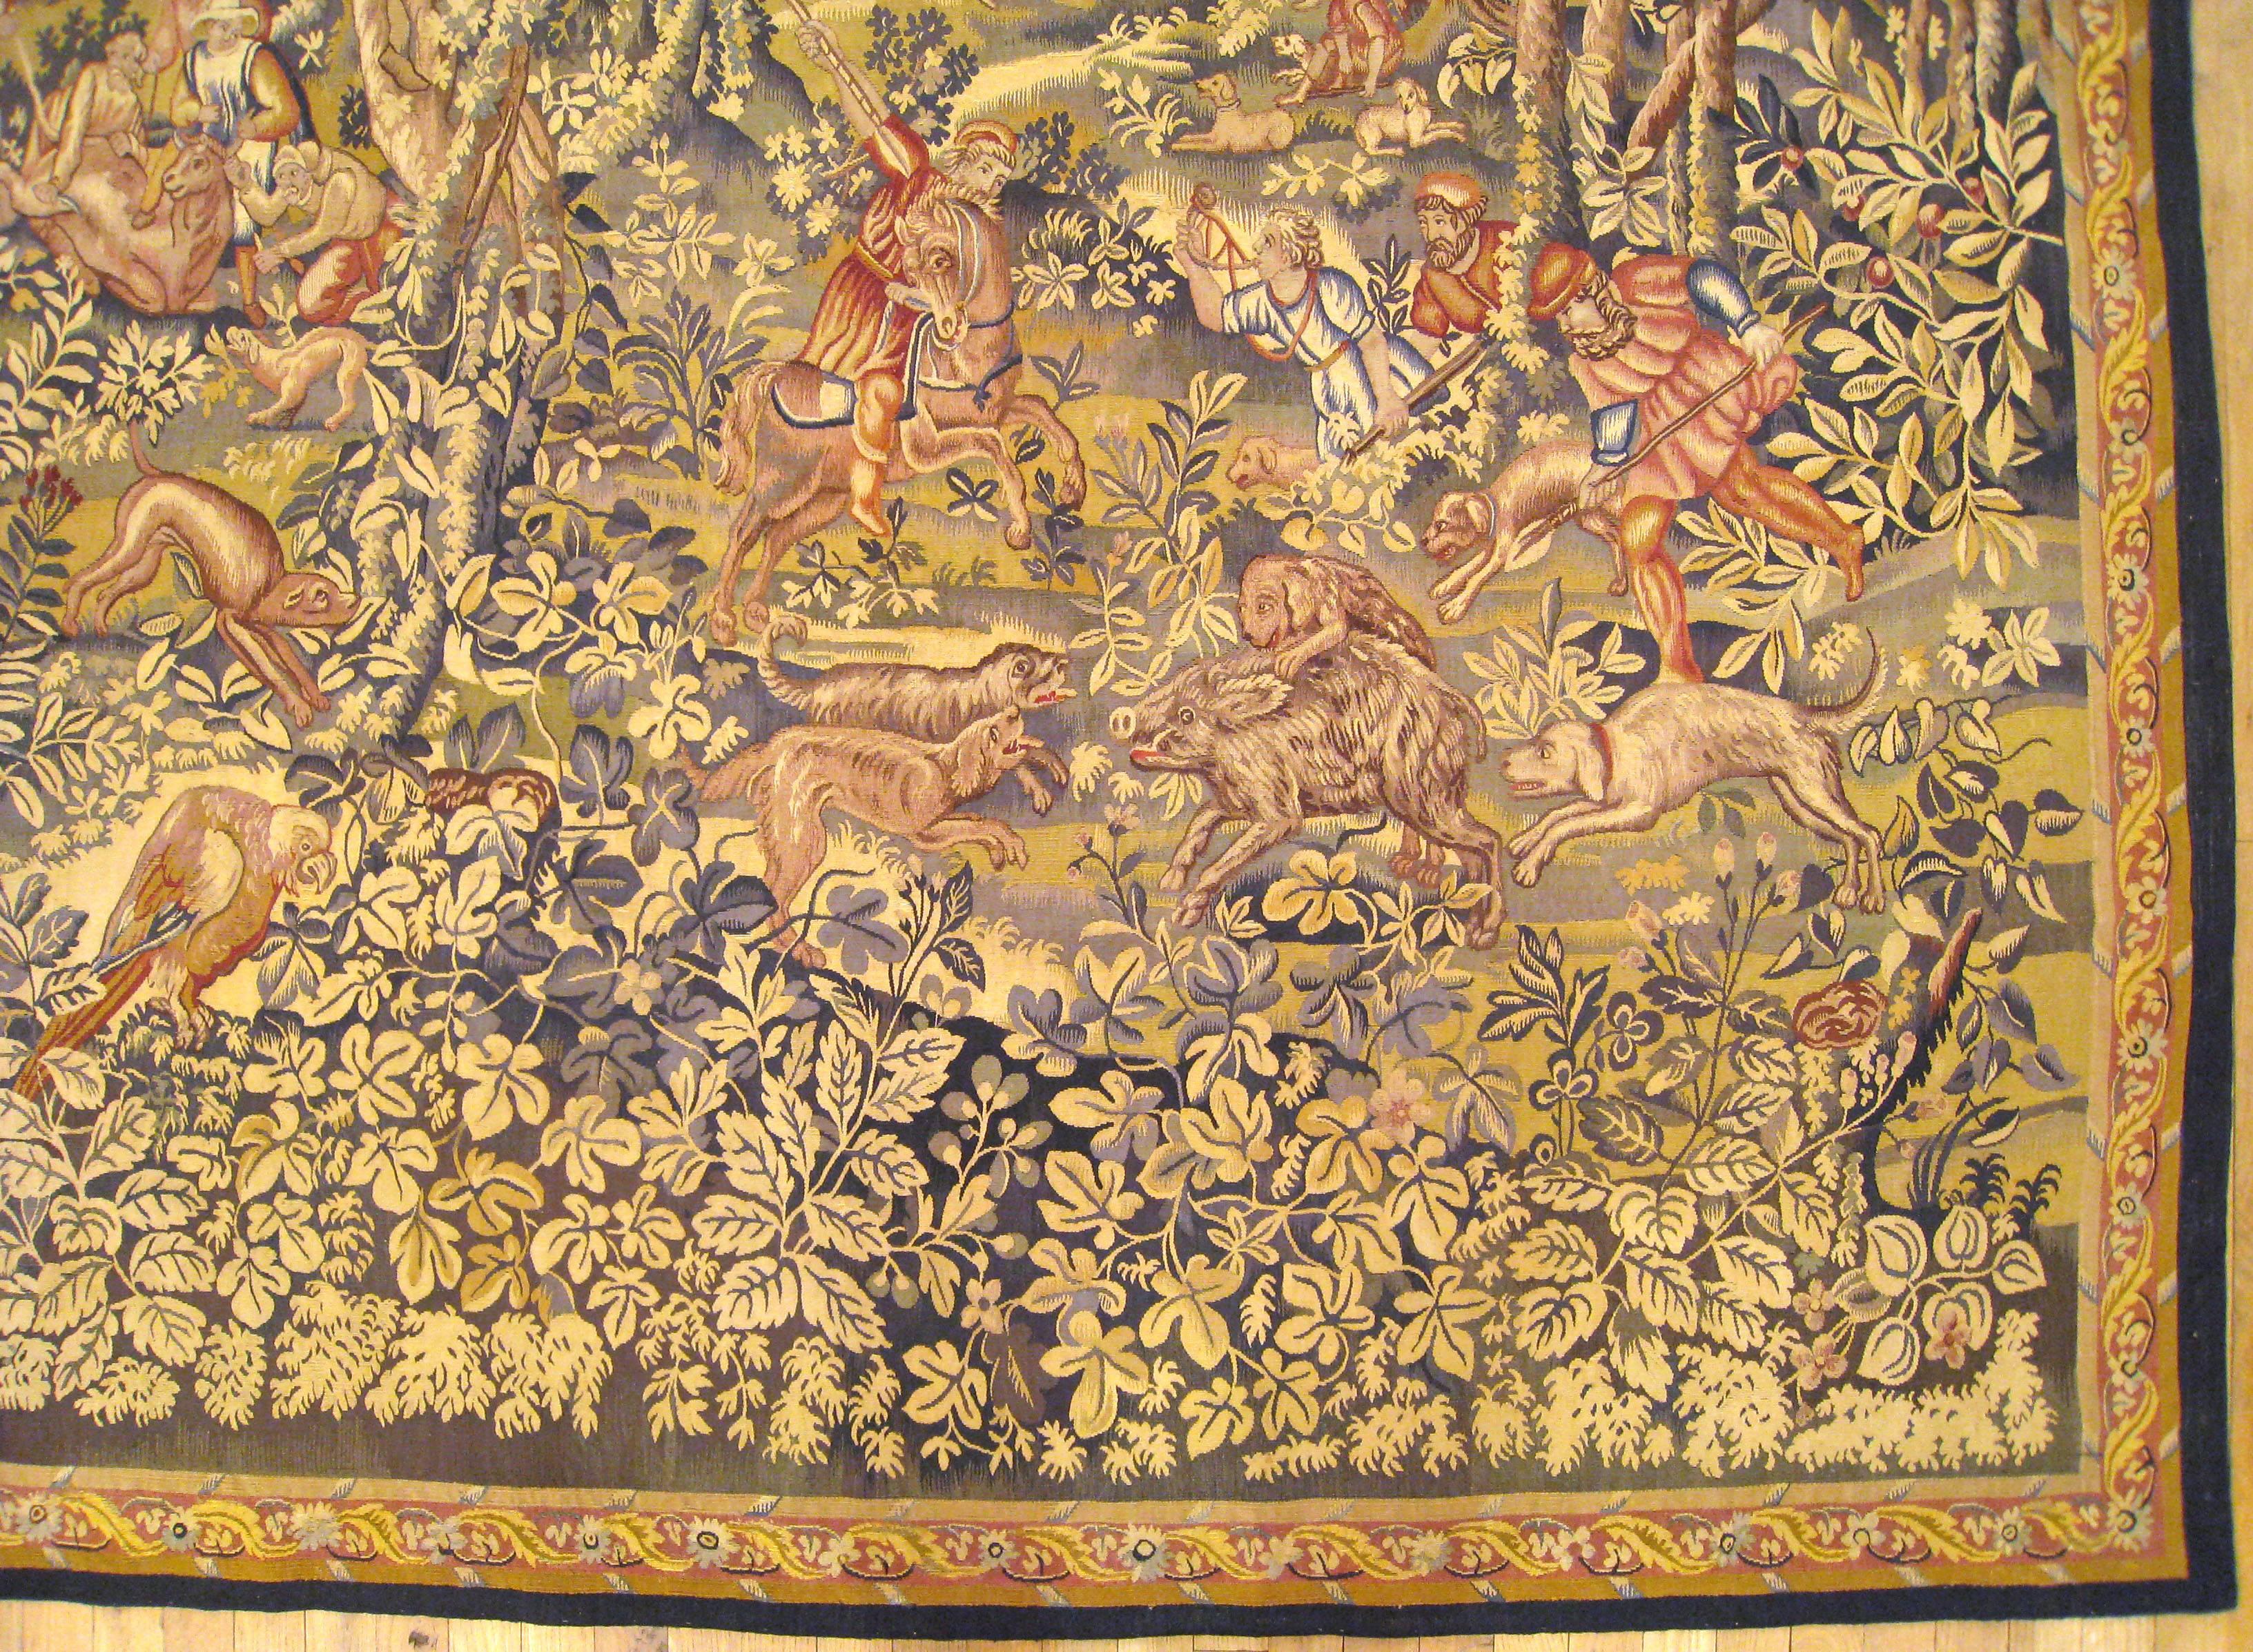 Hand-Woven Antique 19th Century French Fox Hunt Tapestry {from Ralph Lauren window display}